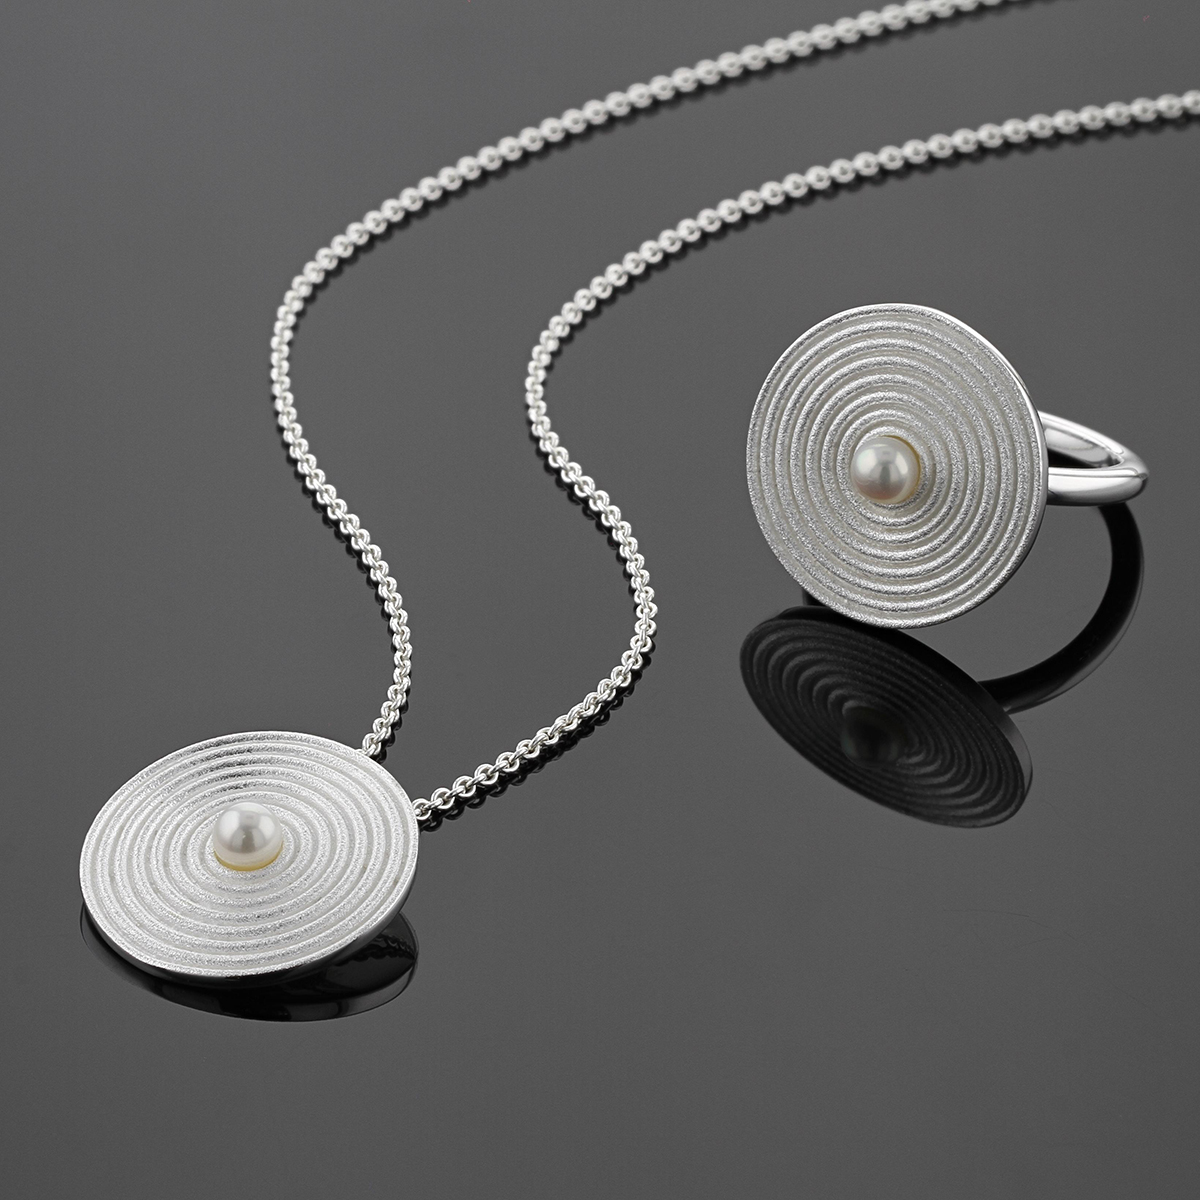 Disc shaped pendant and ring in sterling silver with circular rills originating from freshwater pearls at the center towards the edge.